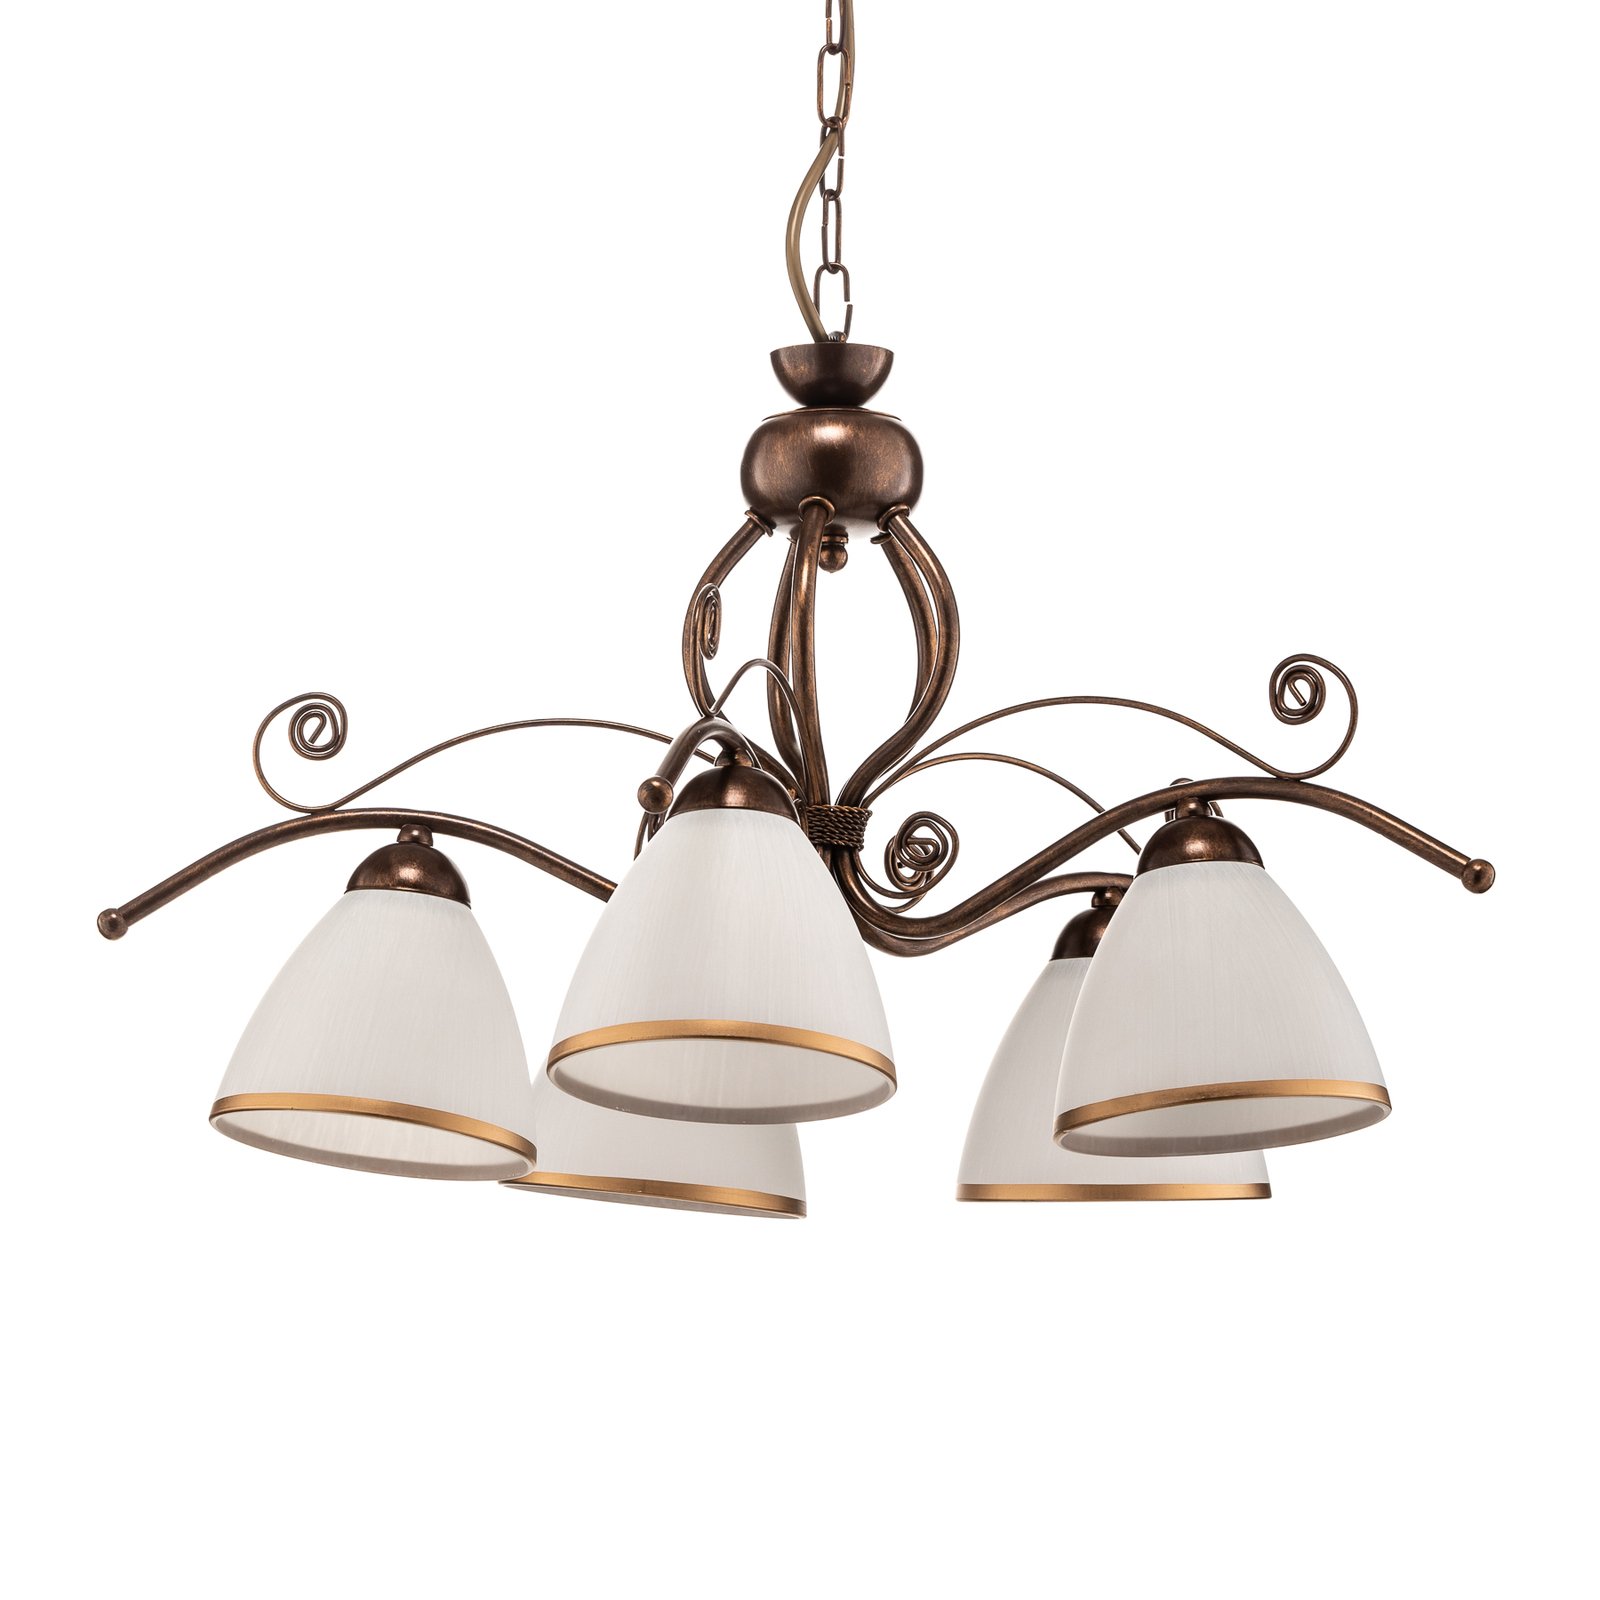 Roma hanging light in white and brown, five-bulb